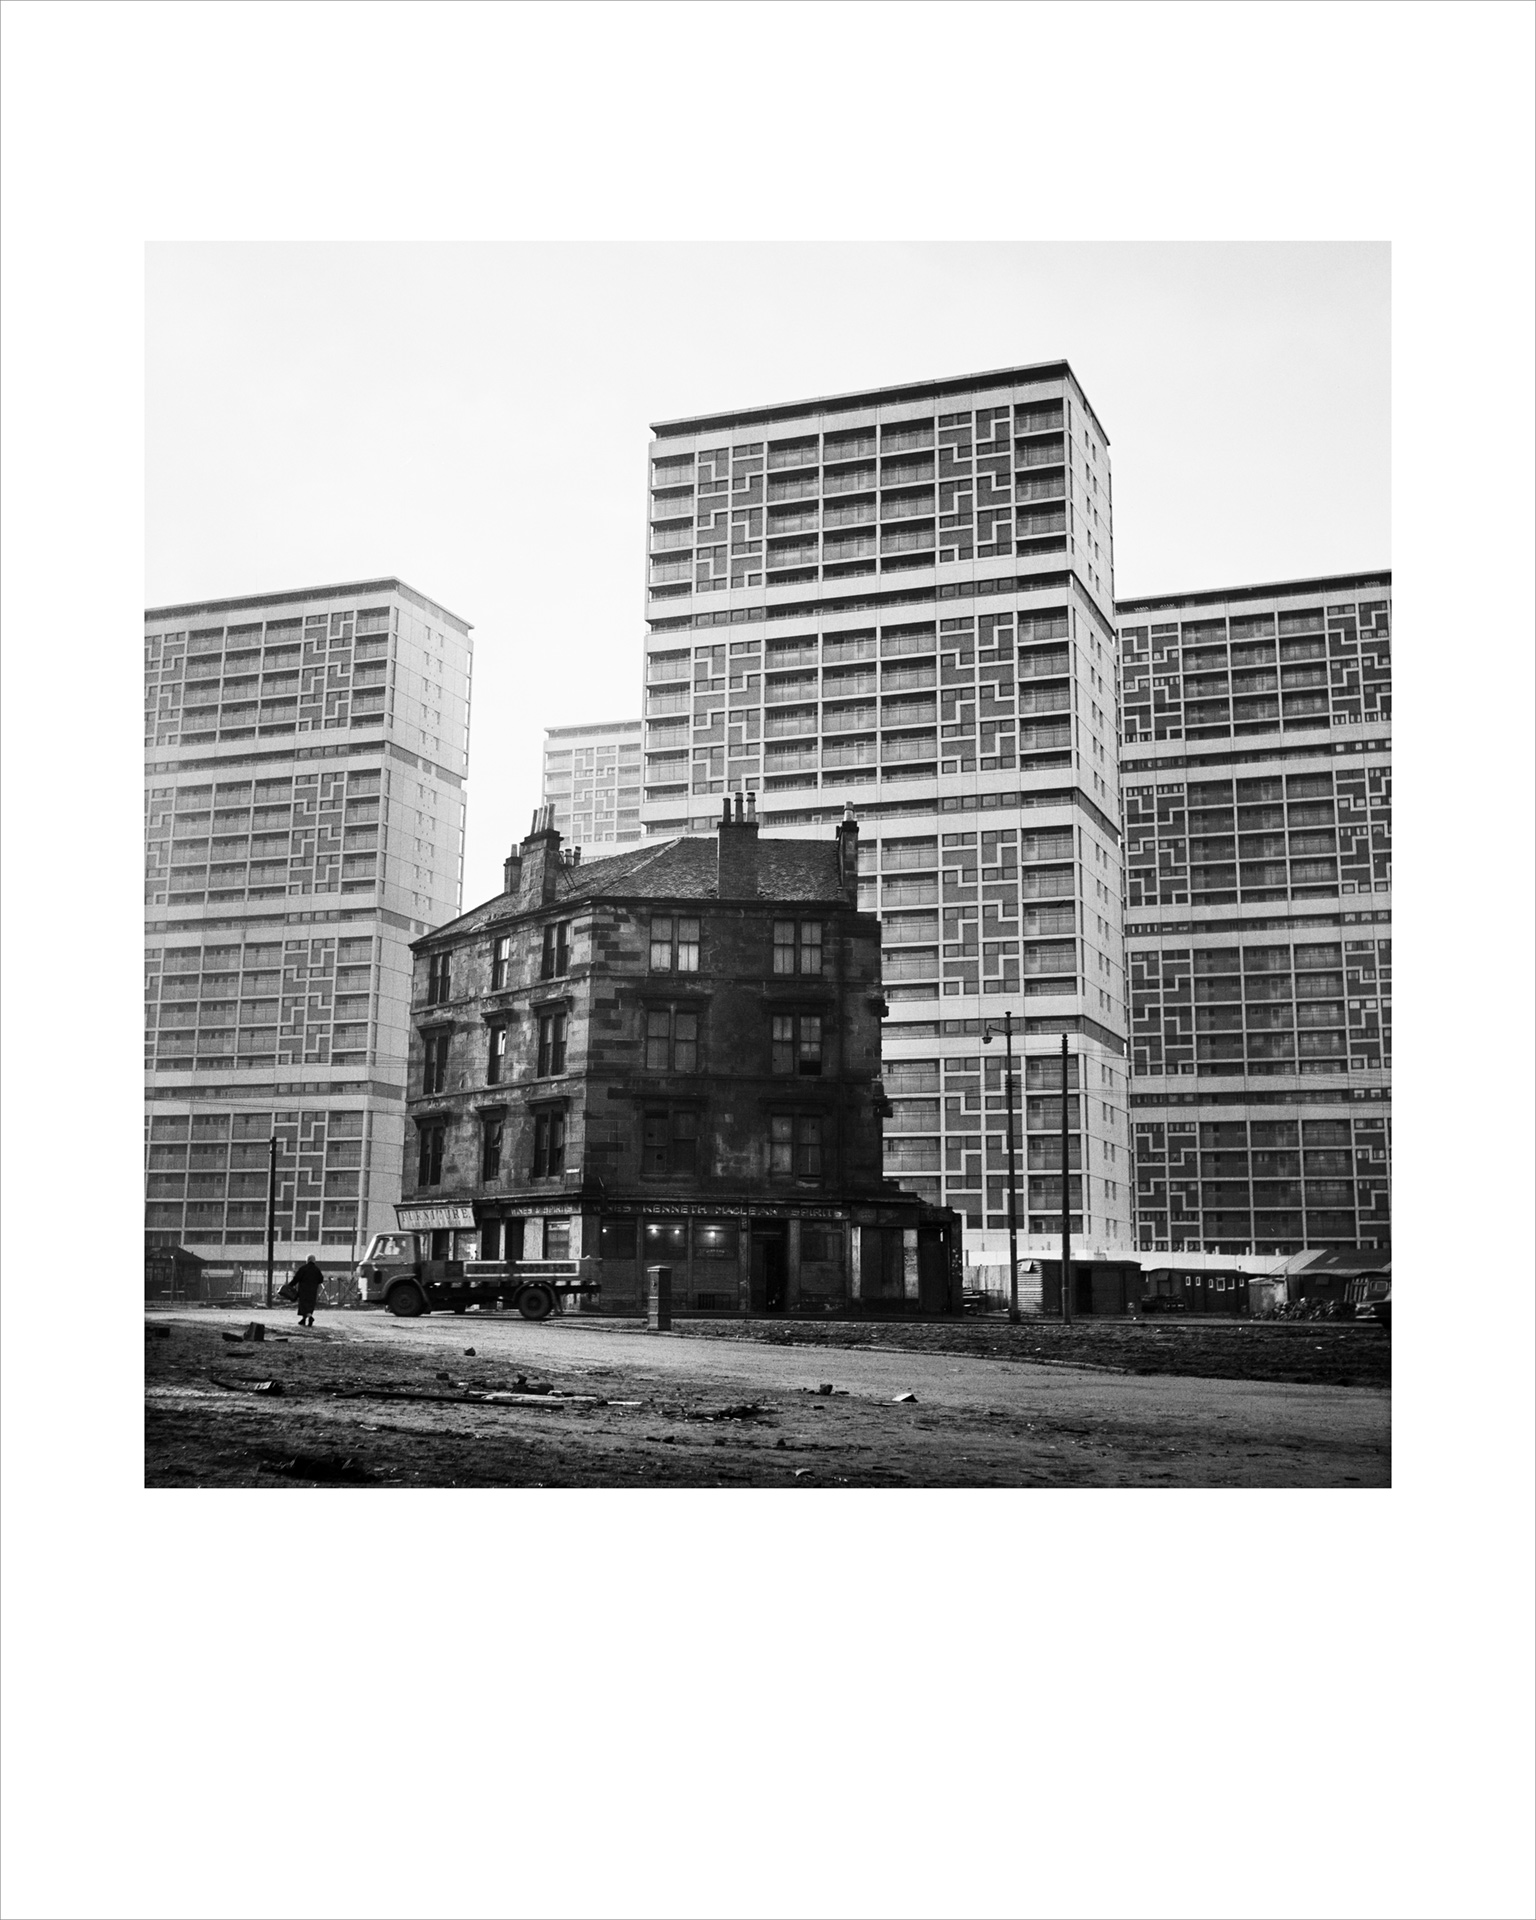 Image of The Old and the New, Gorbals (1968) by Oscar Marzaroli